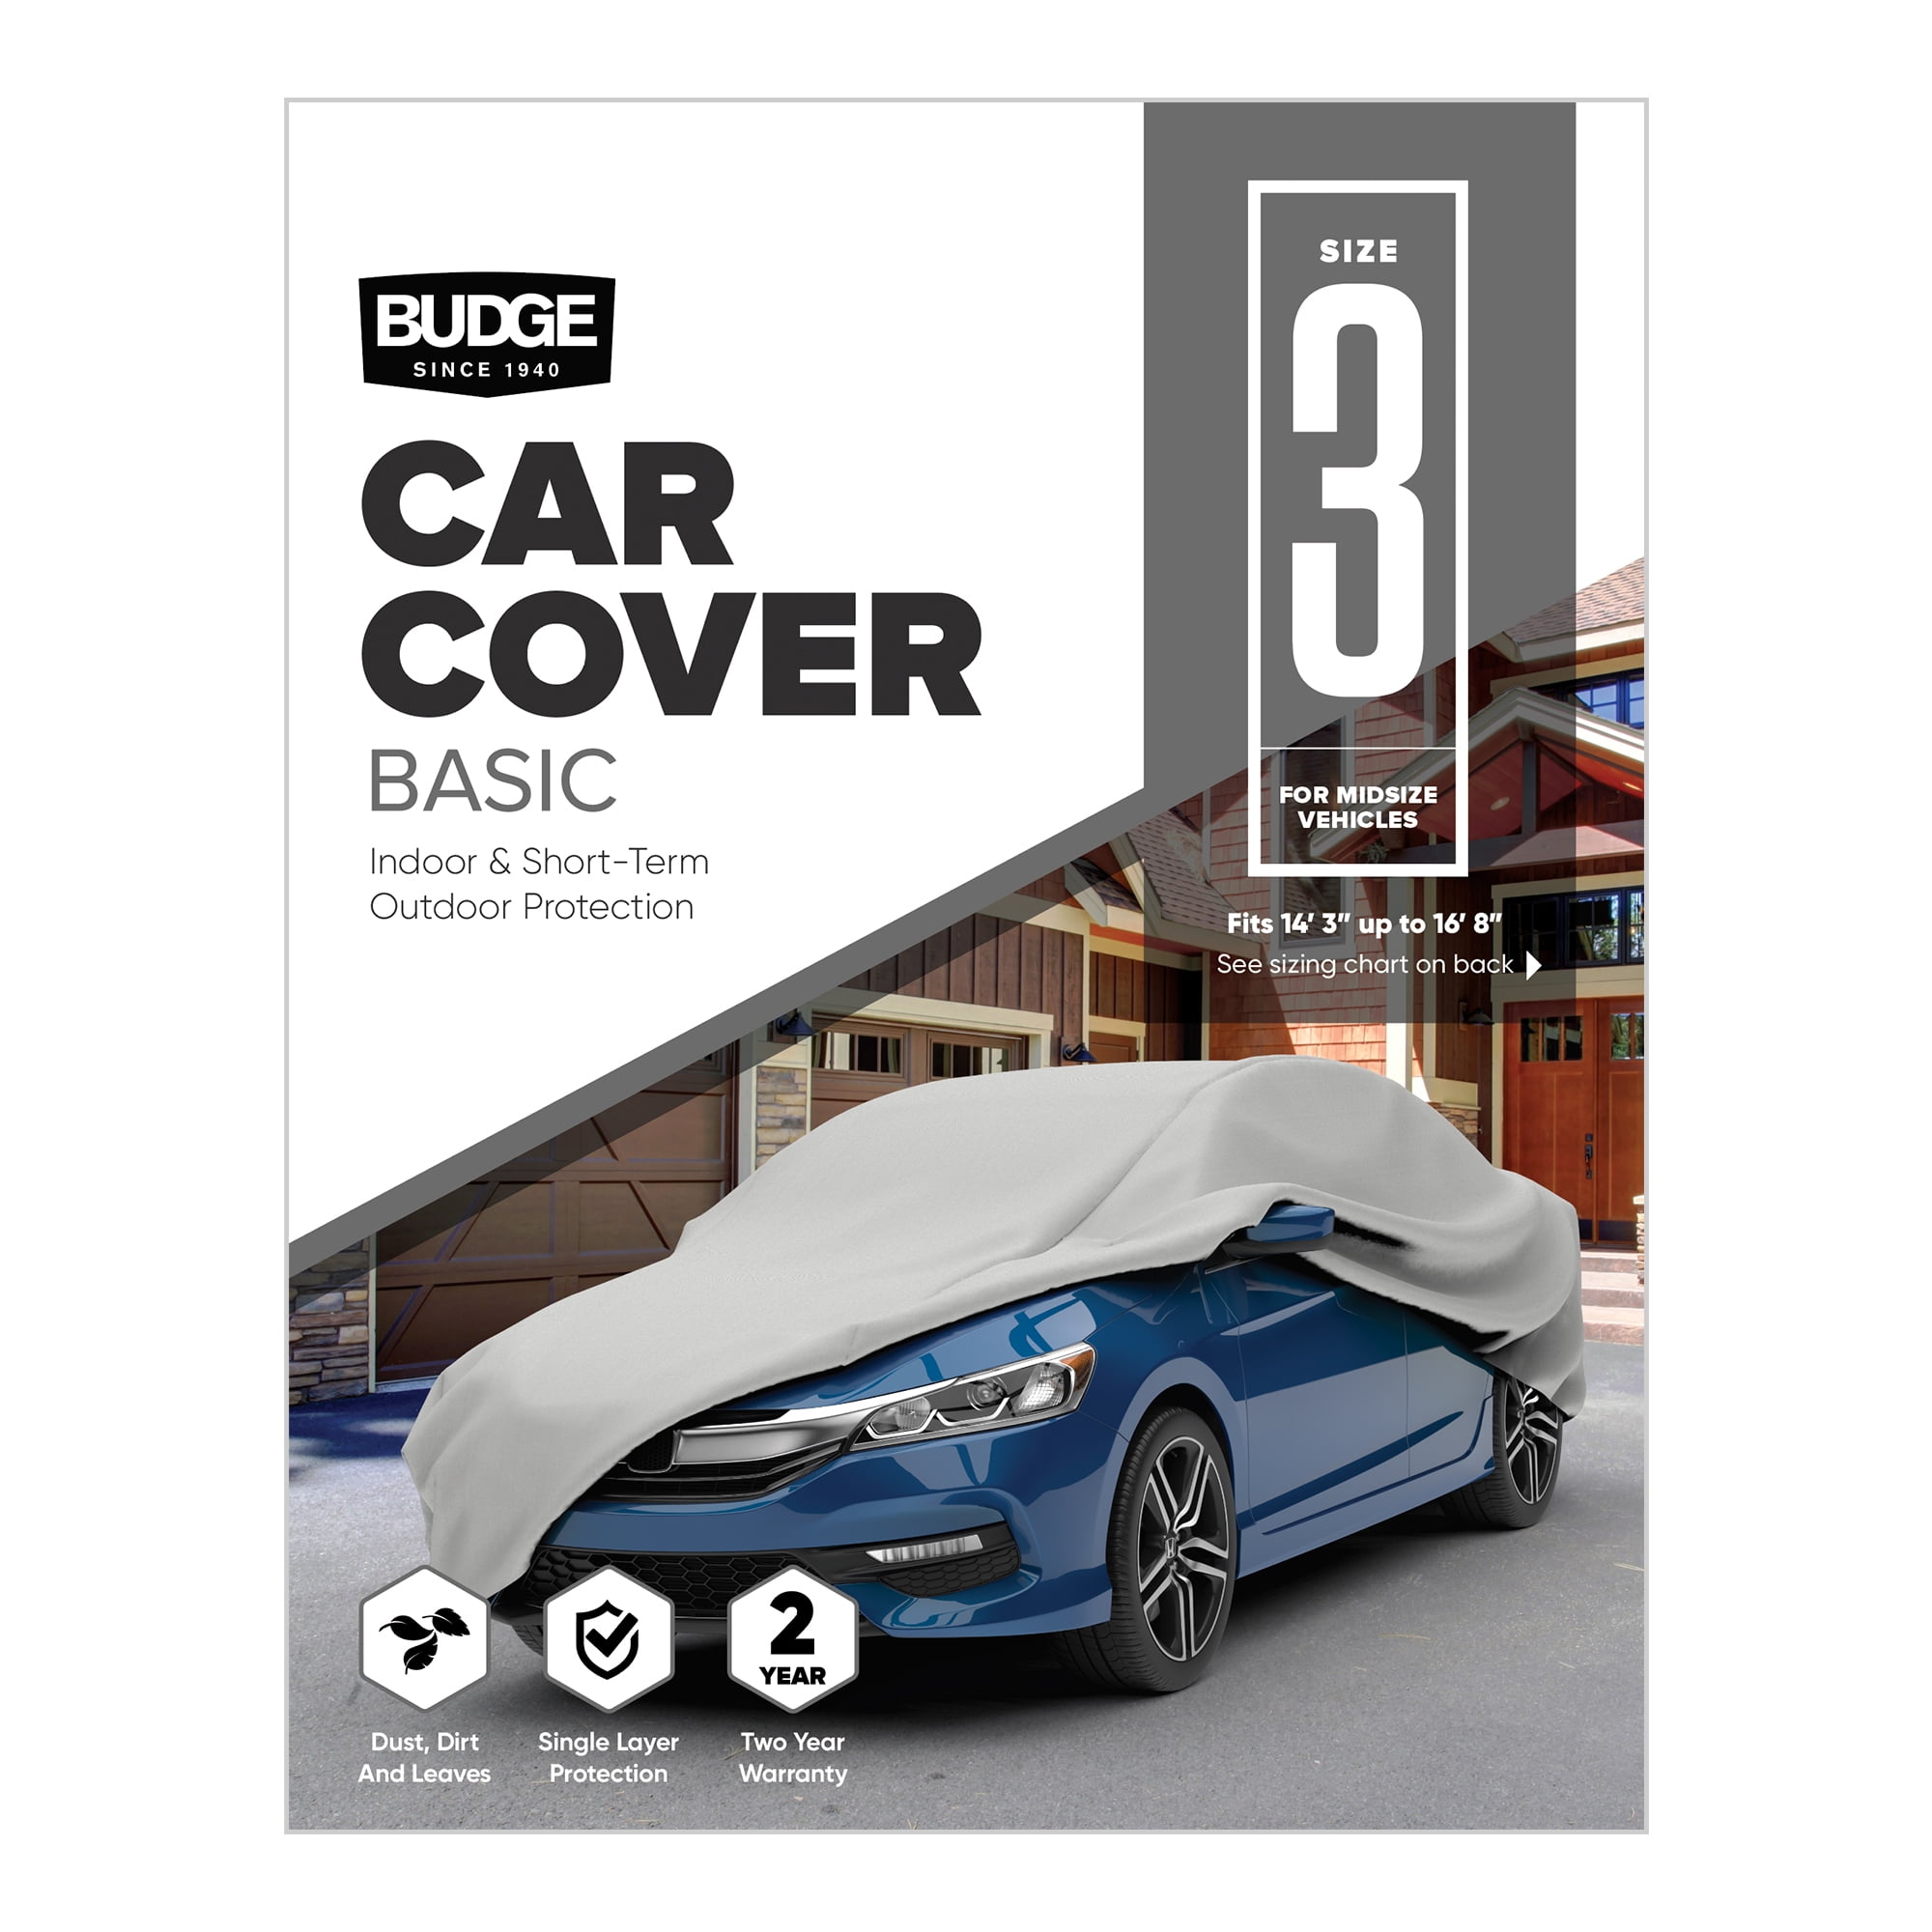 FORD Ka Plus (16 on) PREMIUM Water Resistant Breathable CAR COVER